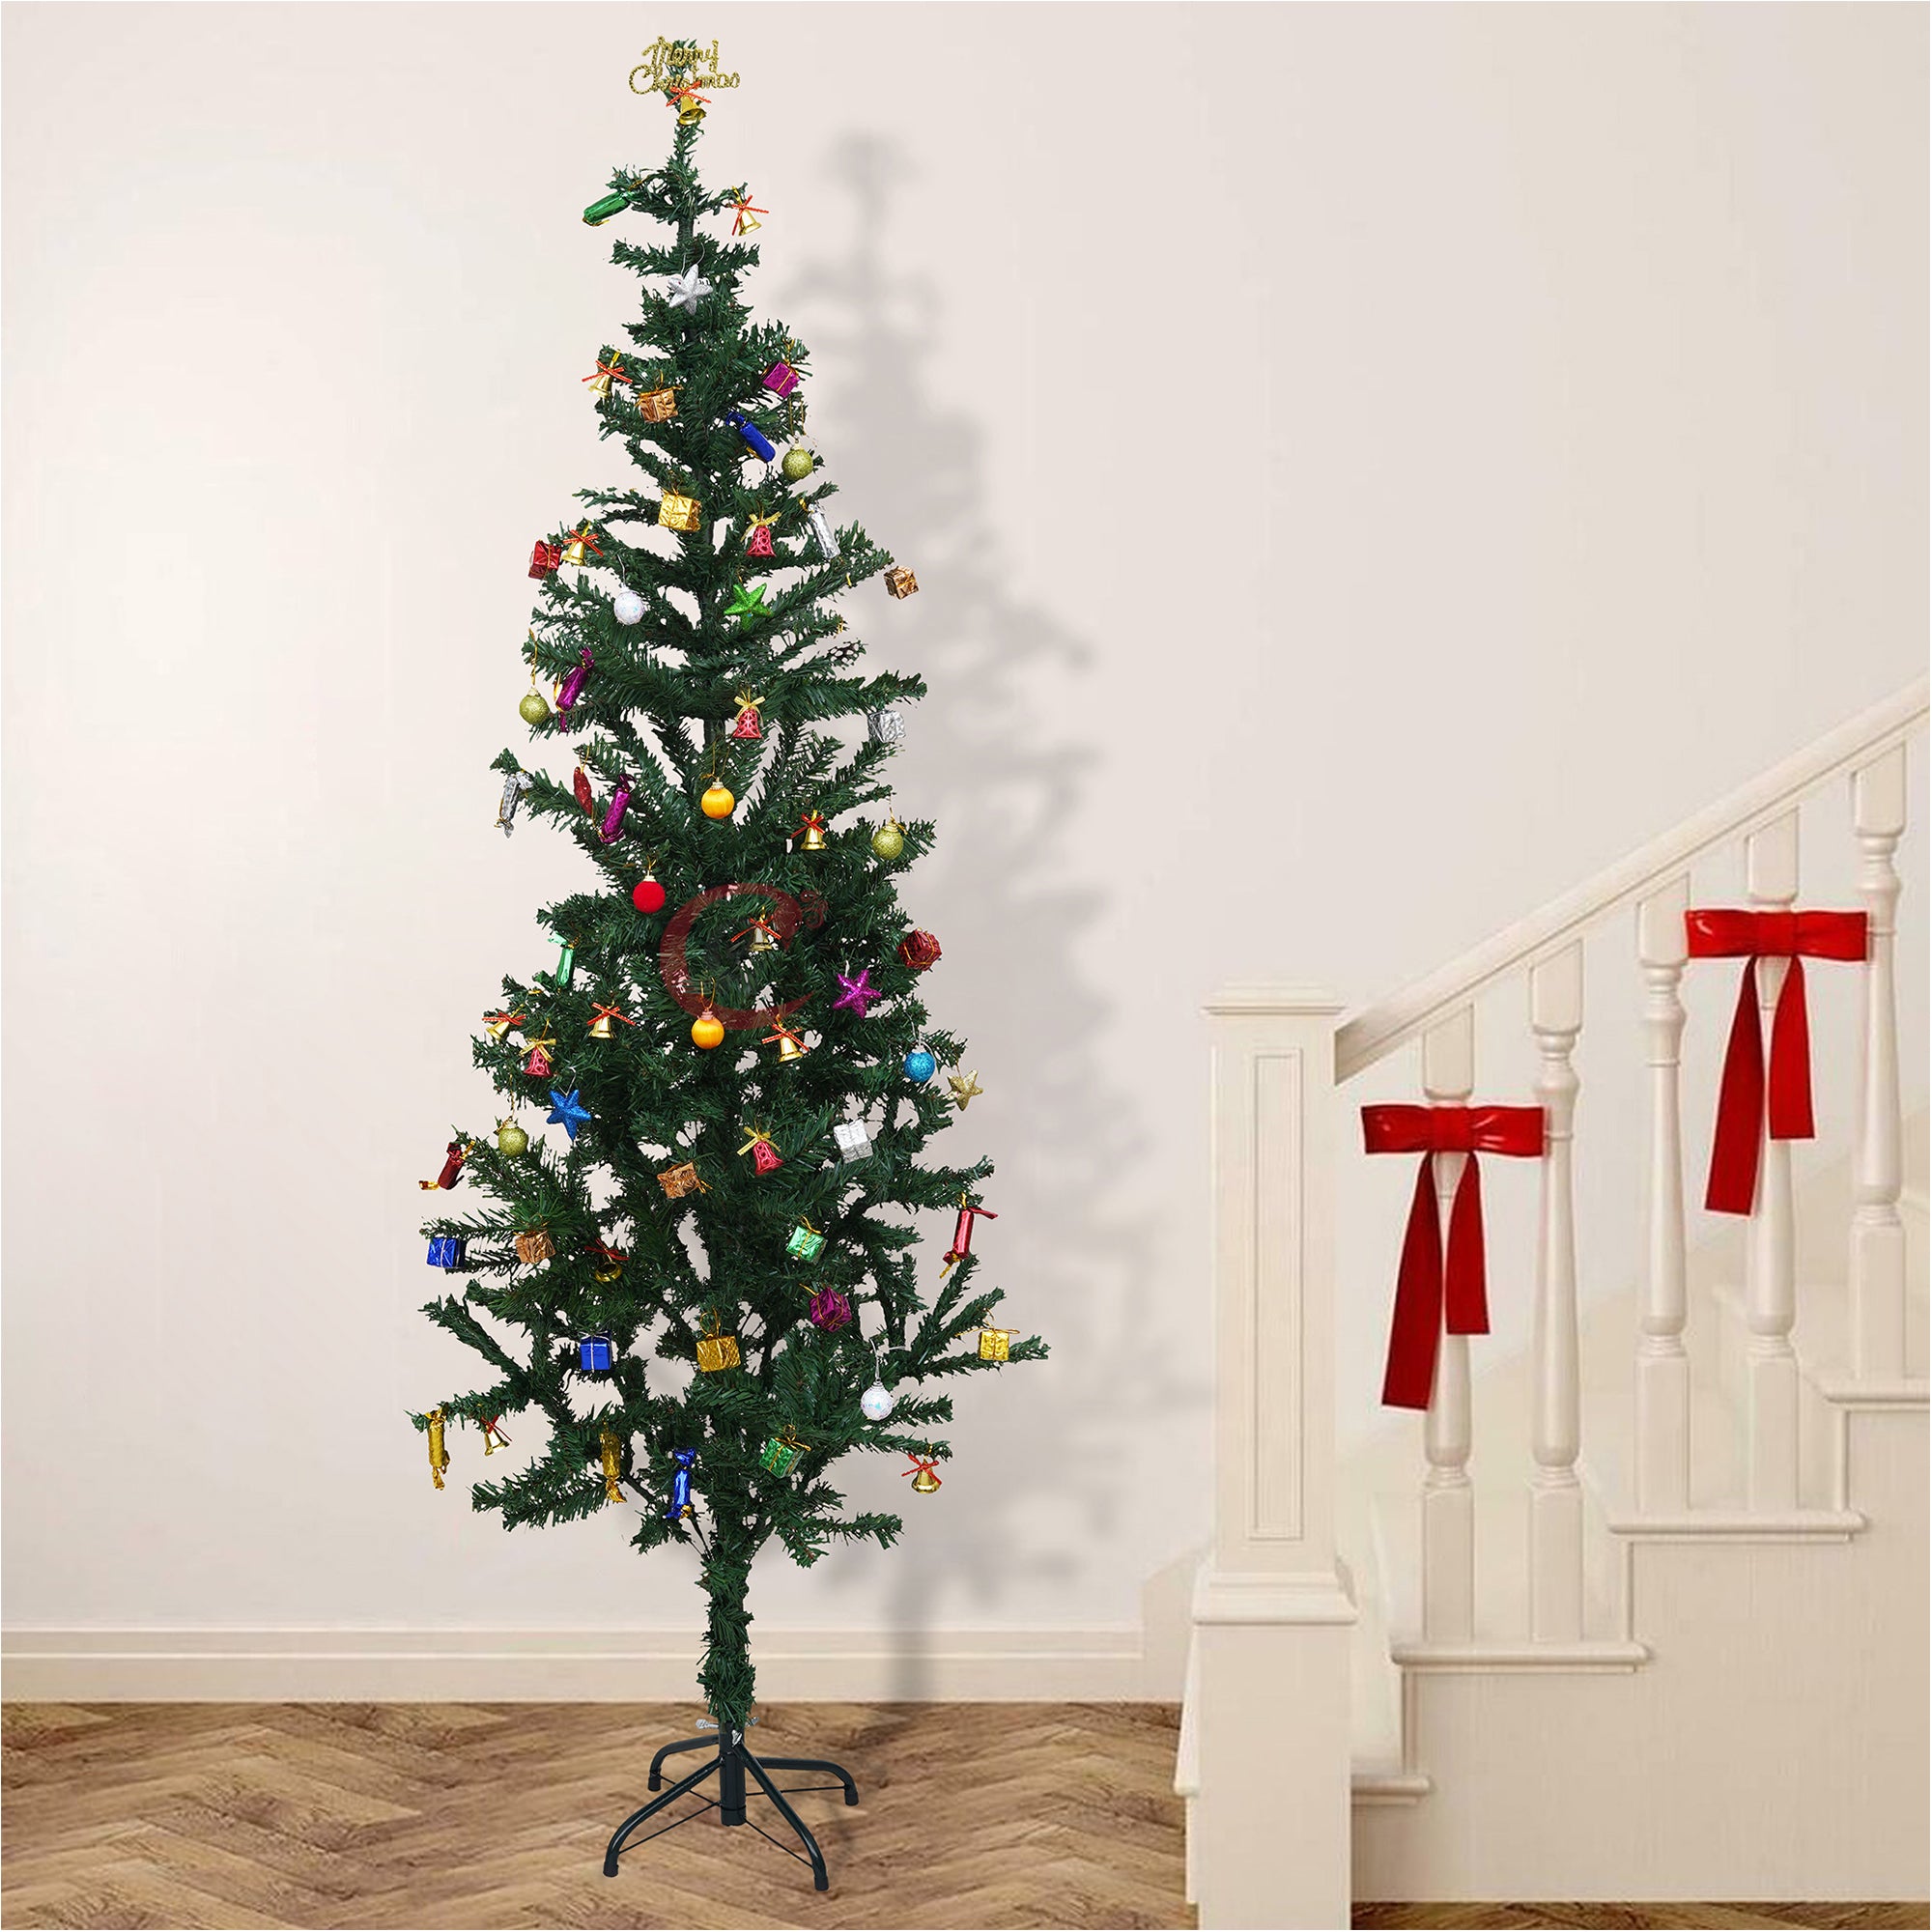 eCraftIndia 5 Feet Green Artificial Christmas Tree Xmas Pine Tree with Stand and 100 Christmas Decoration Ornaments Props - Merry Christmas Decoration Item for Home, Office, and Church